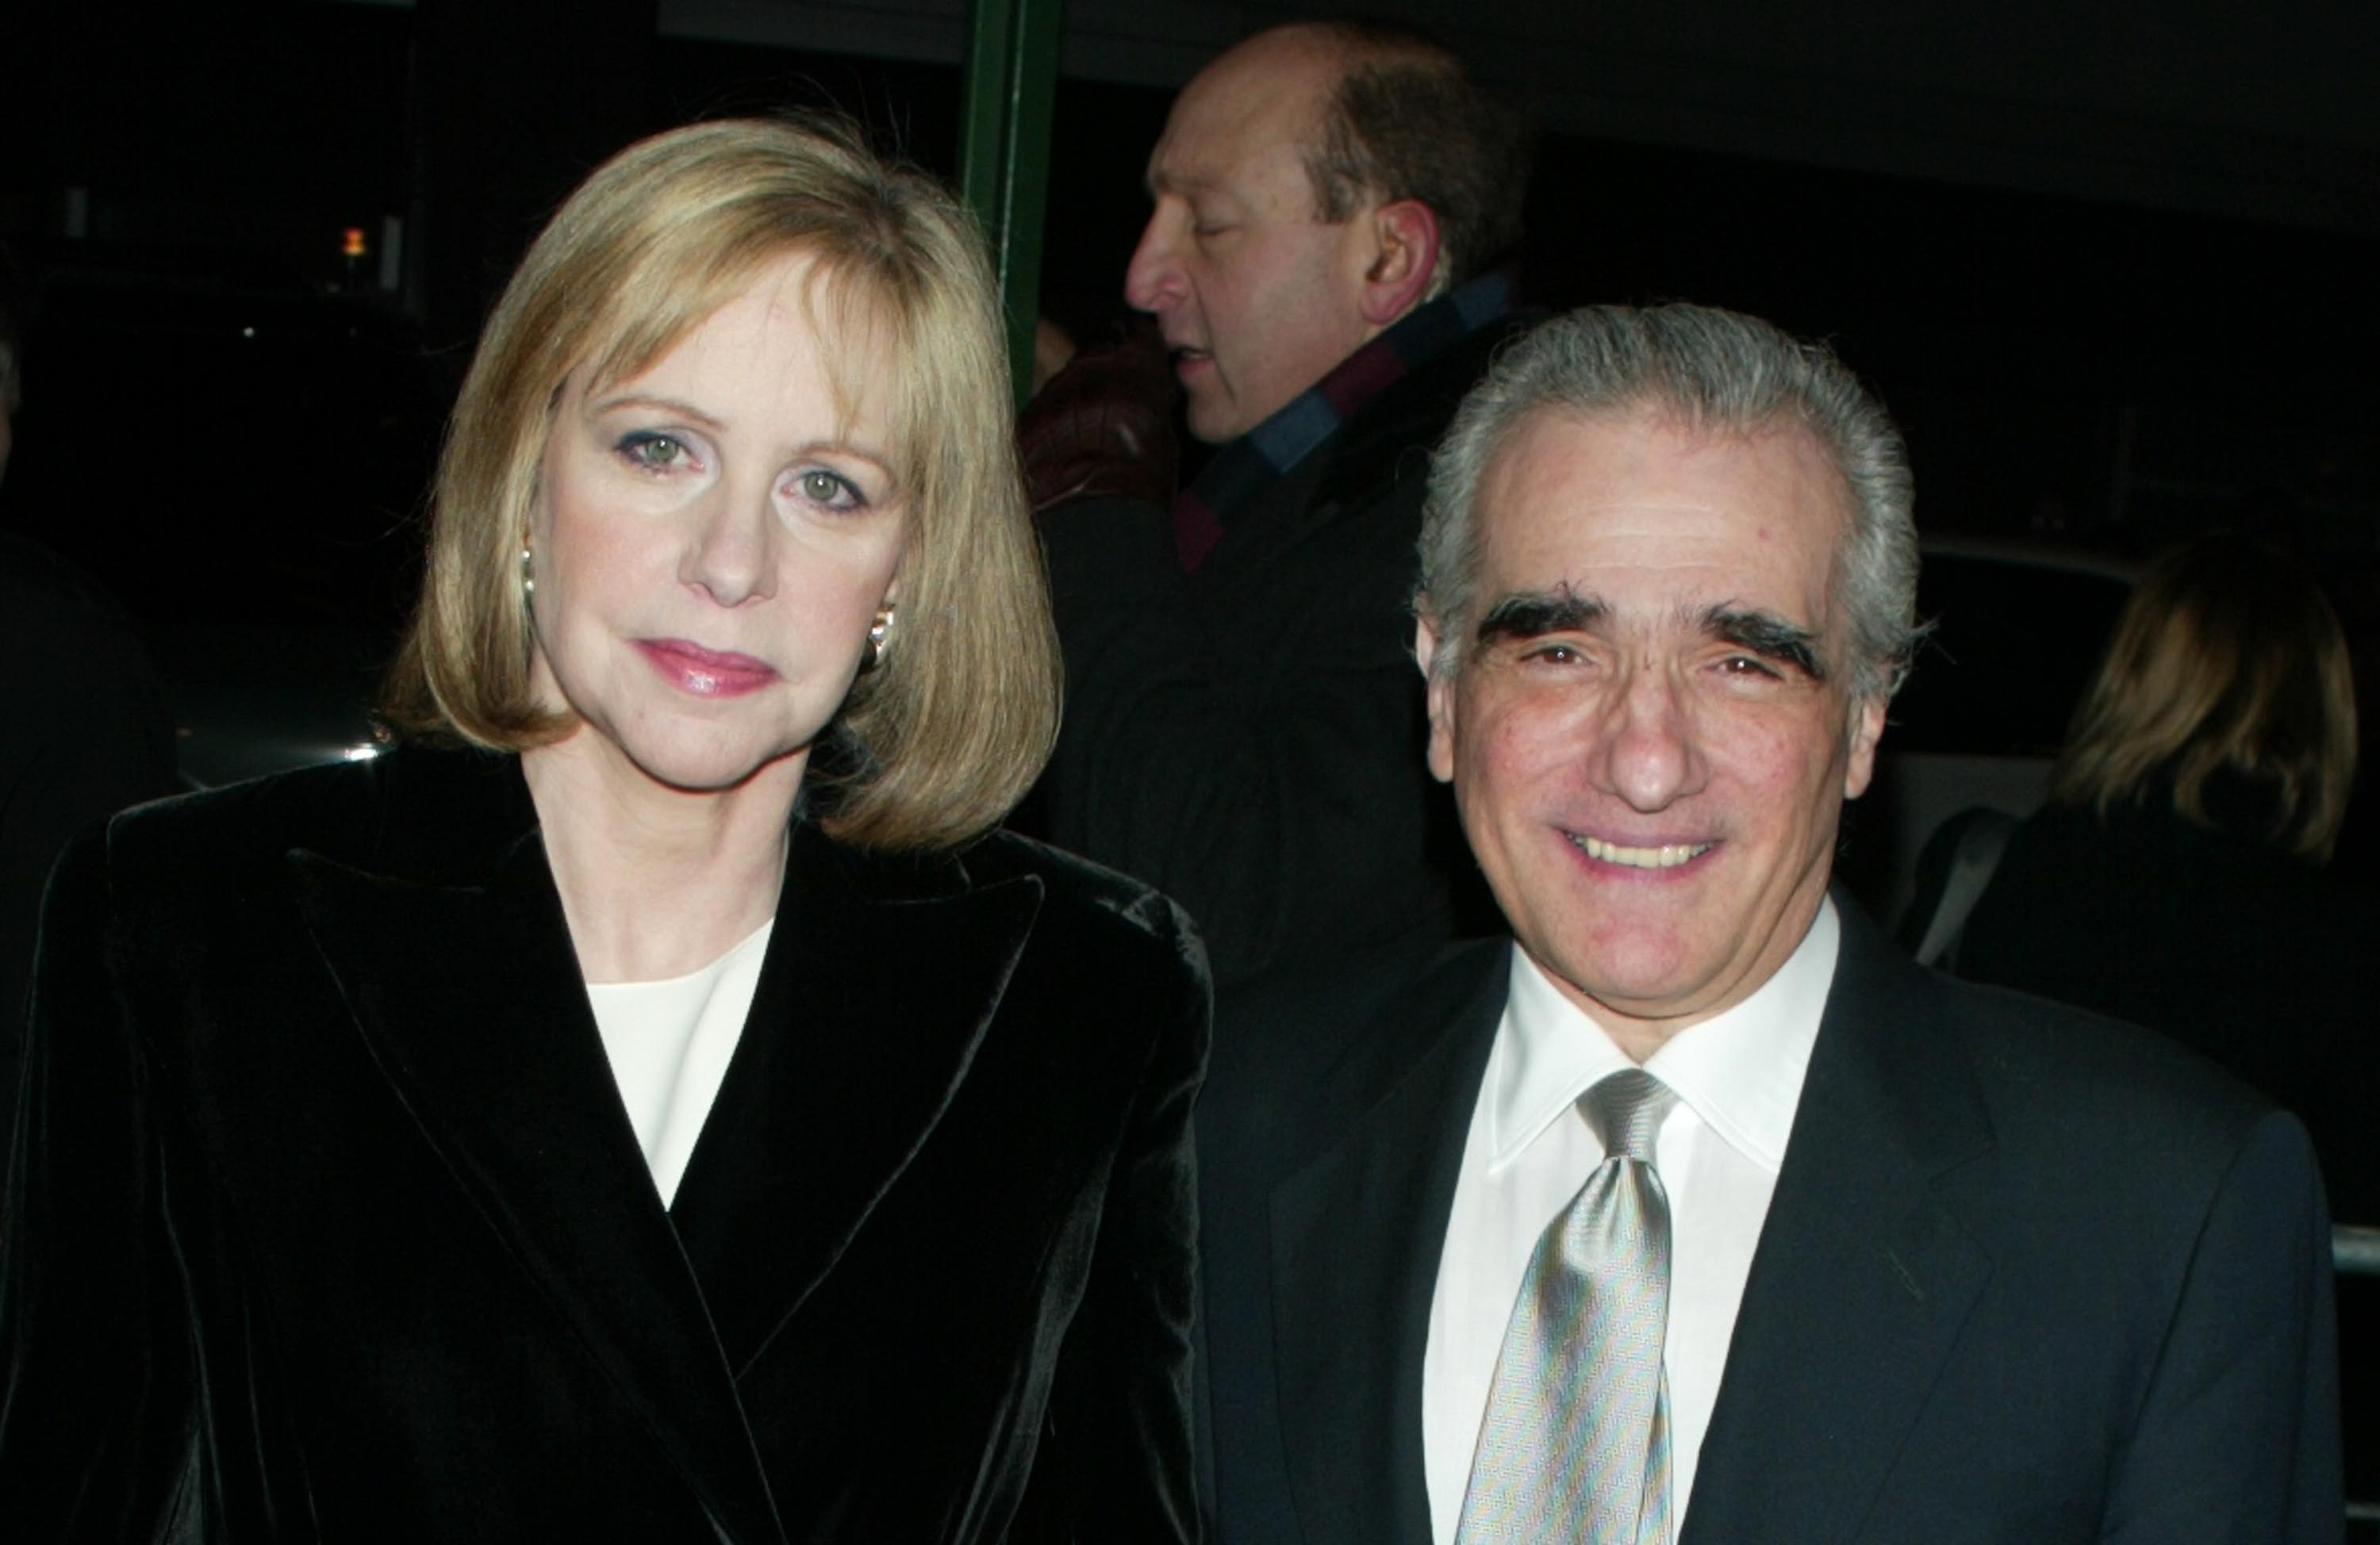 Martin Scorsese and Helen Morris at the premiere of "Gangs of New York" on December 9, 2002. | Source: Getty Images